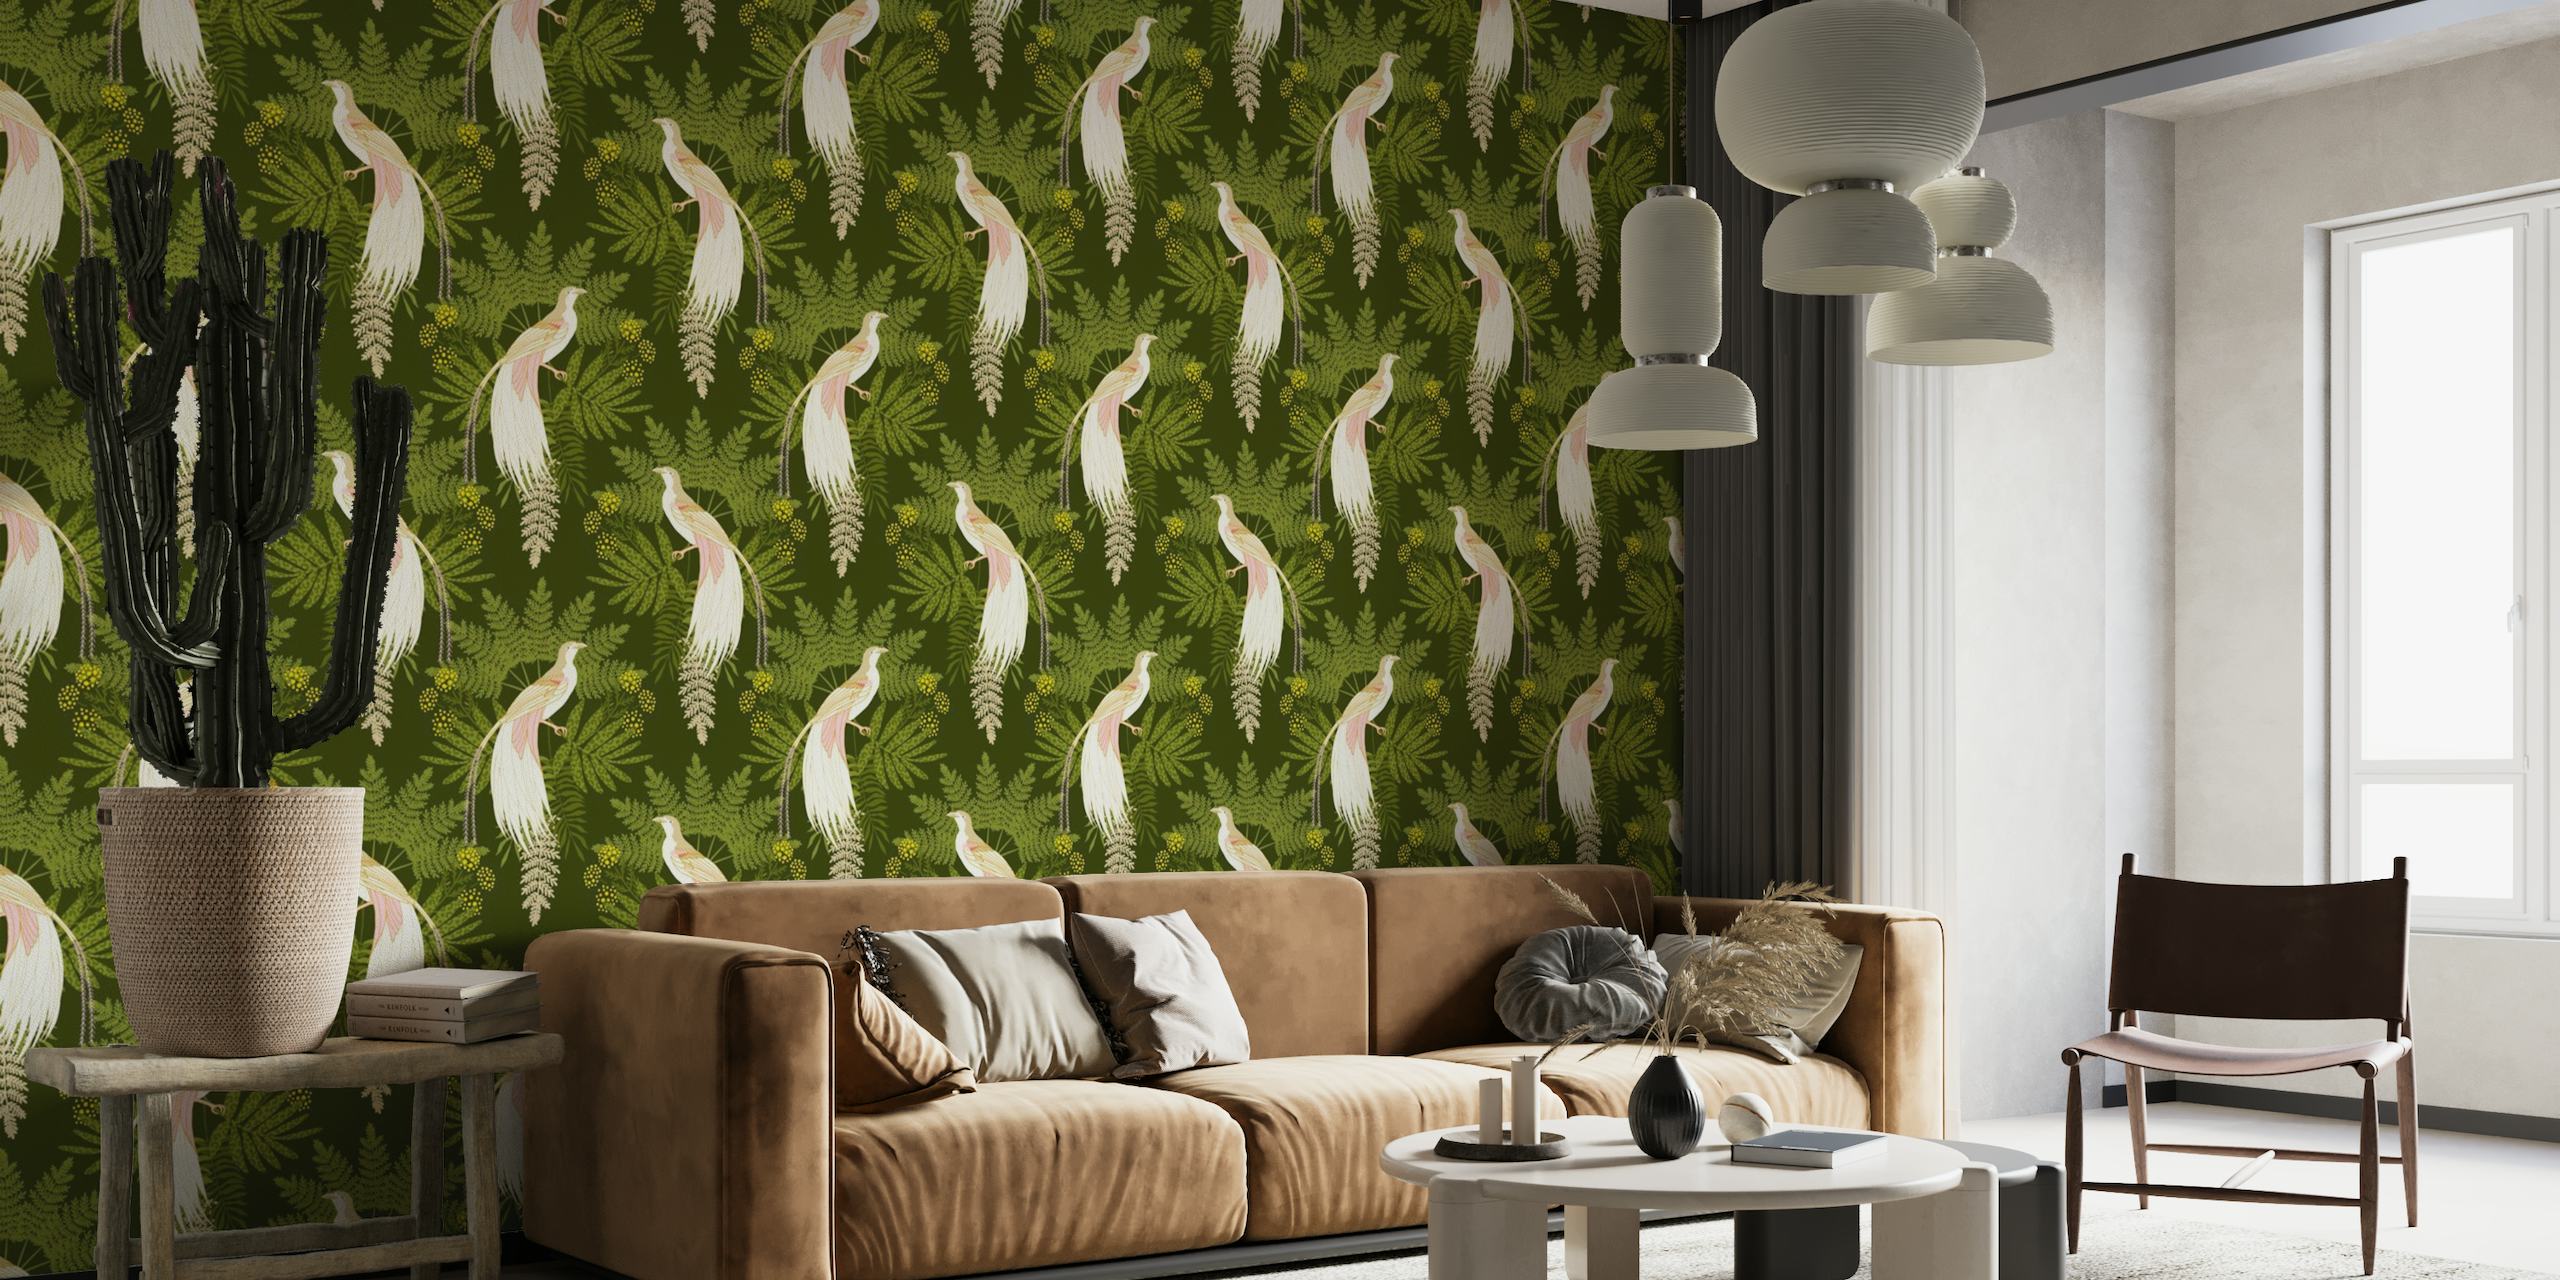 Tropical bird of paradise and greenery wall mural